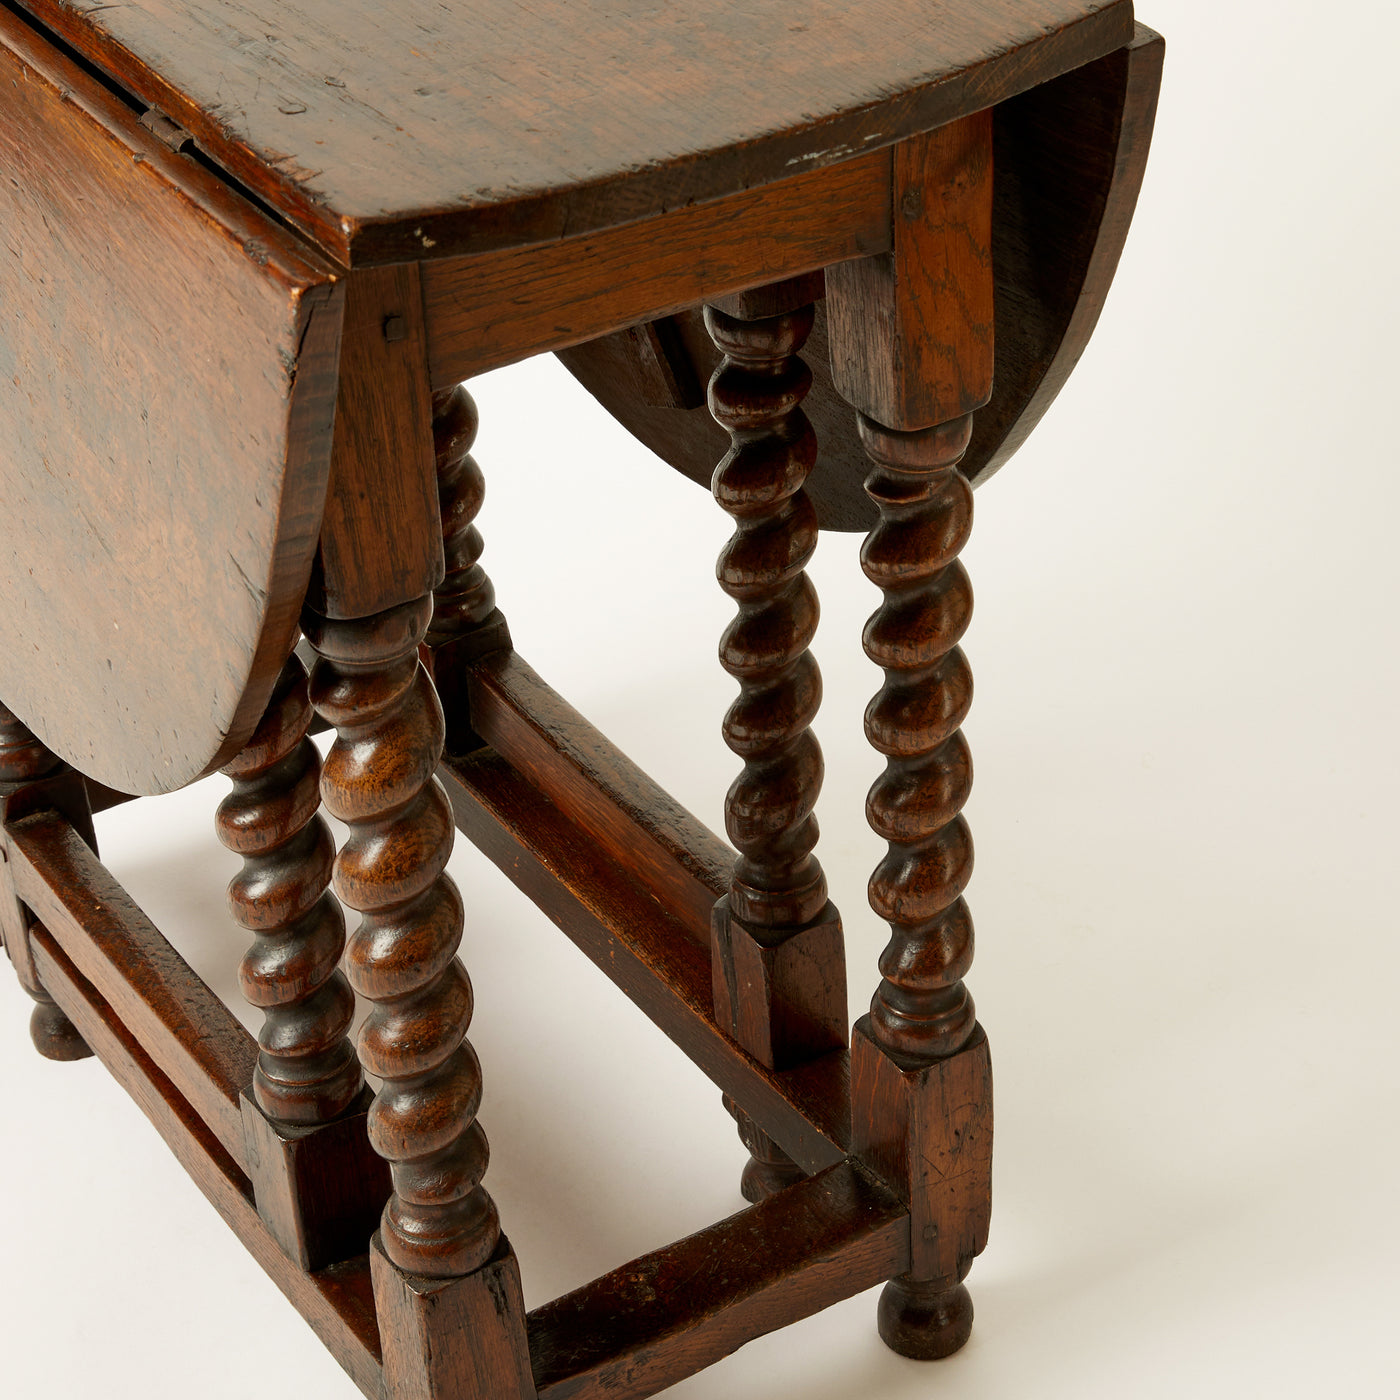 Antique Carved Wooden Gate Leg Table